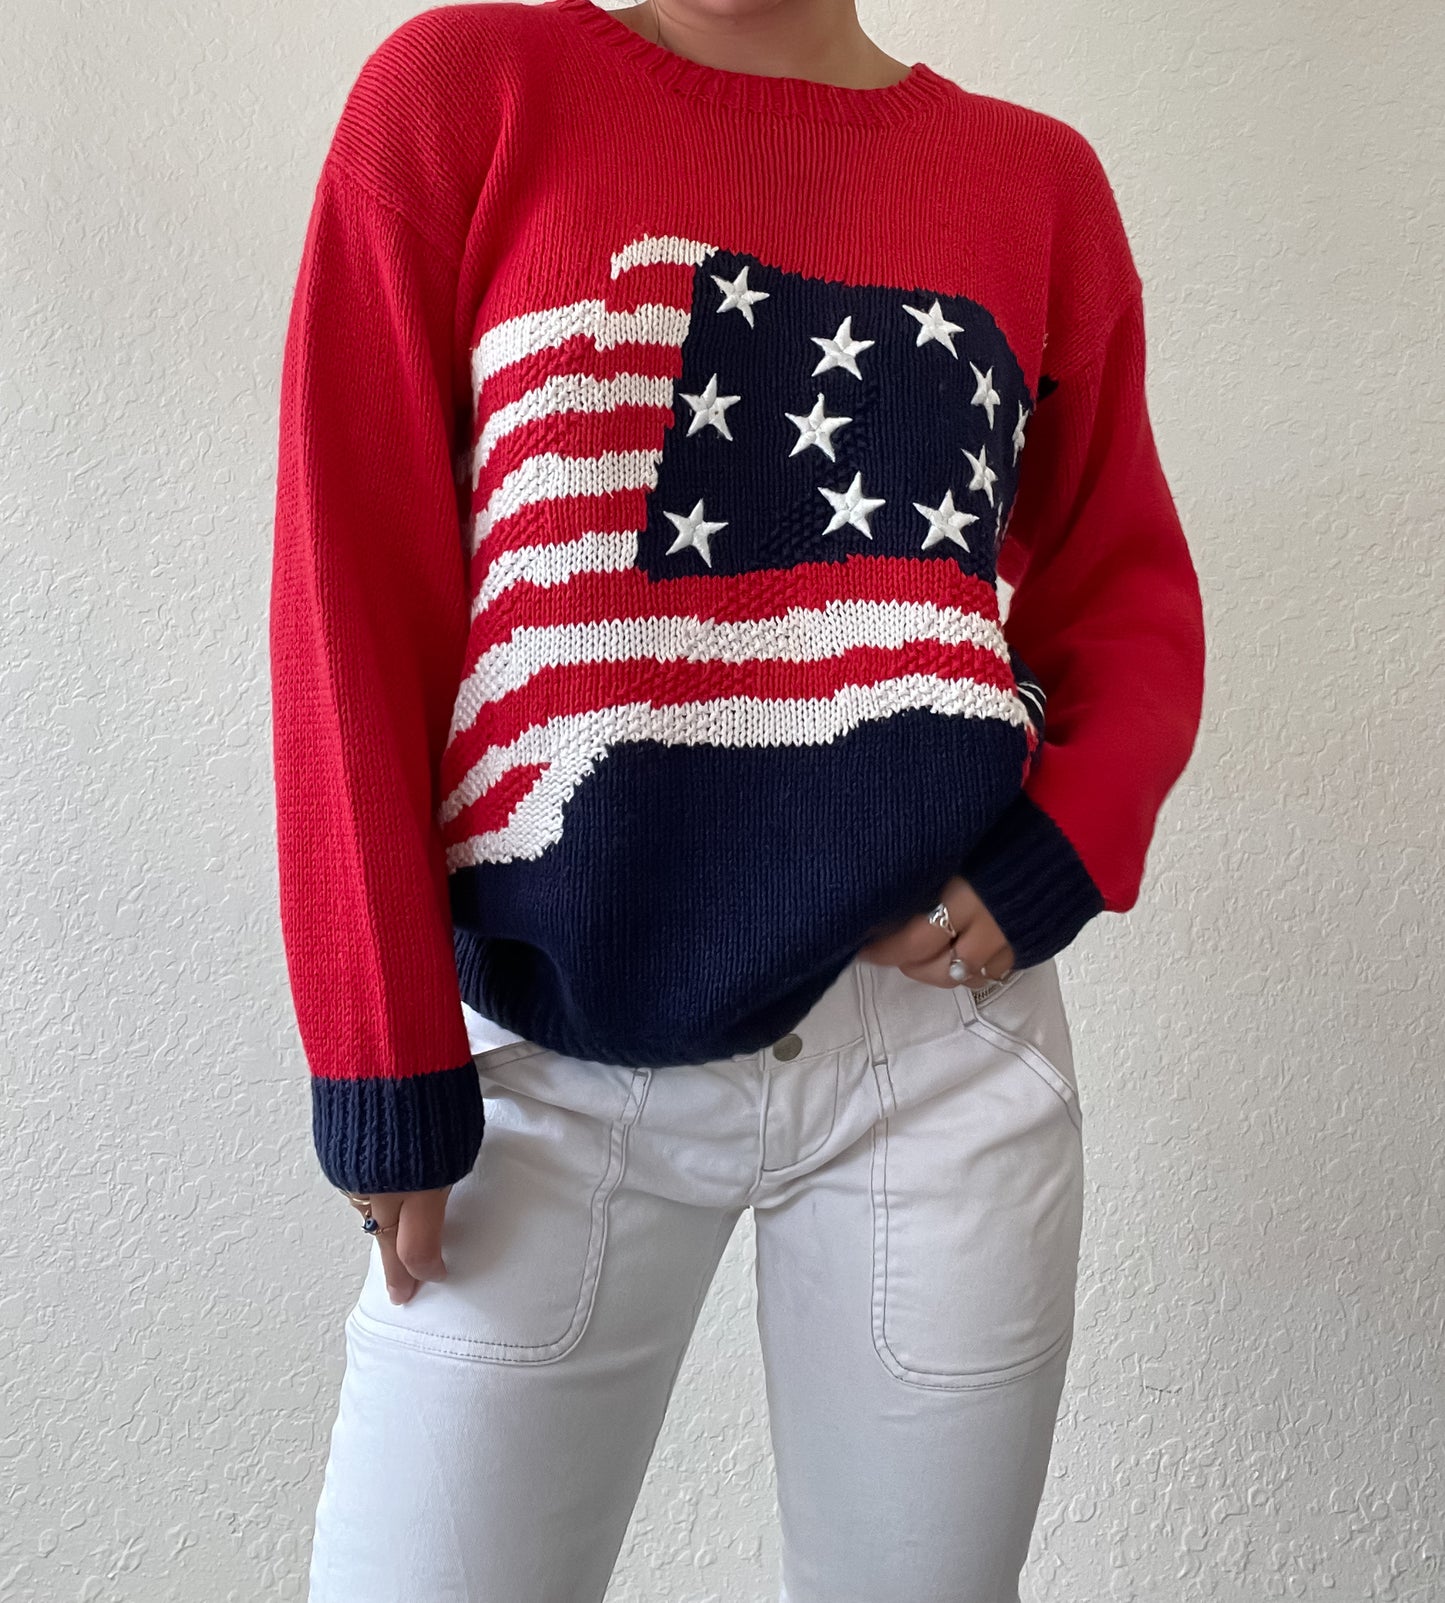 Hand knit sweater